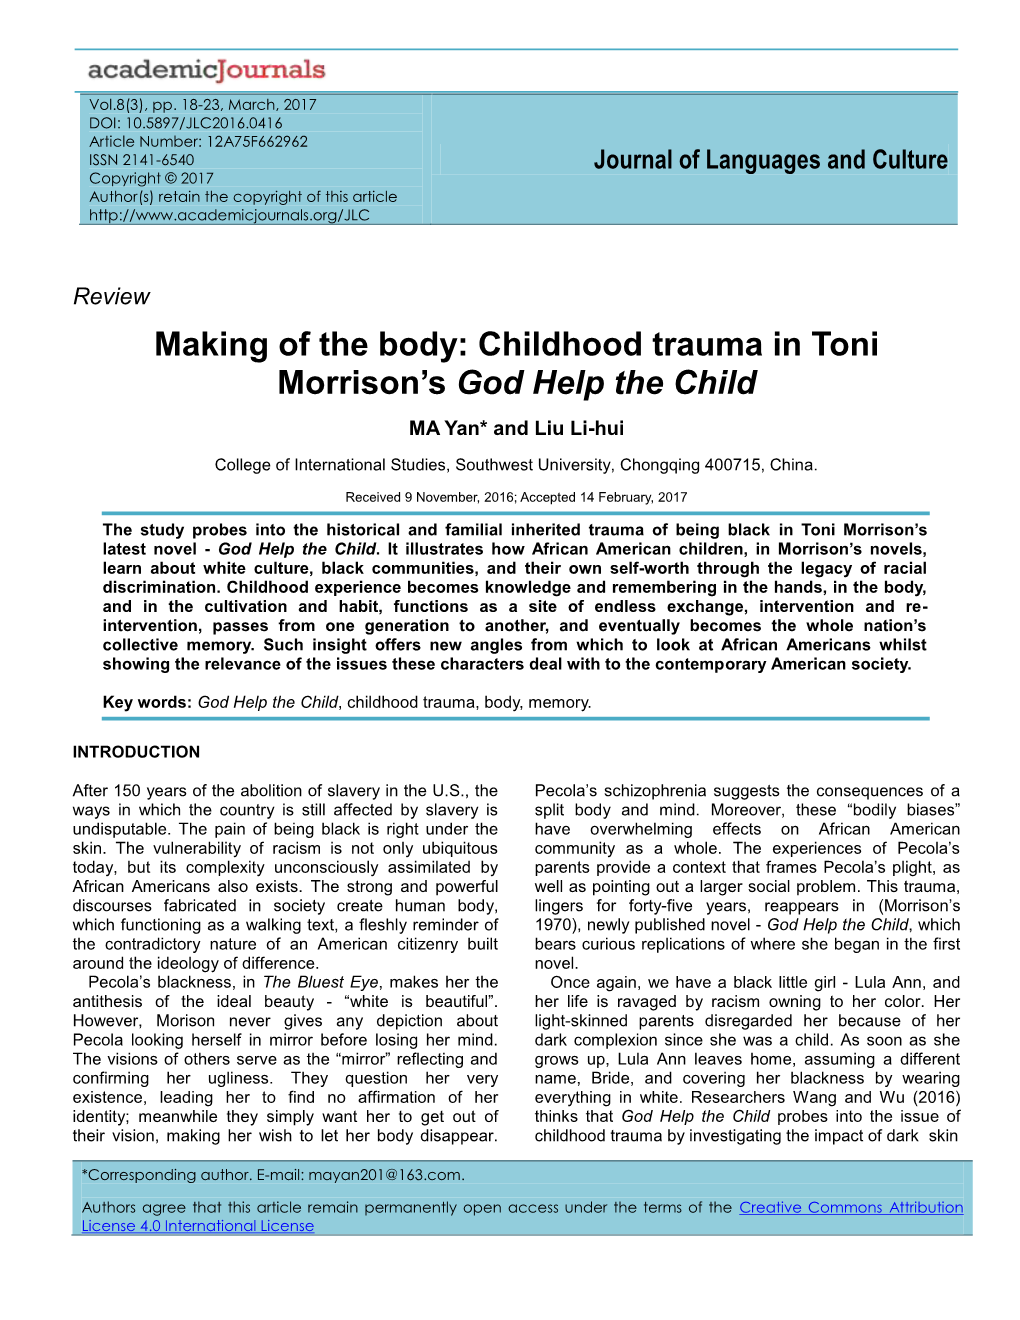 Making of the Body: Childhood Trauma in Toni Morrison's God Help the Child